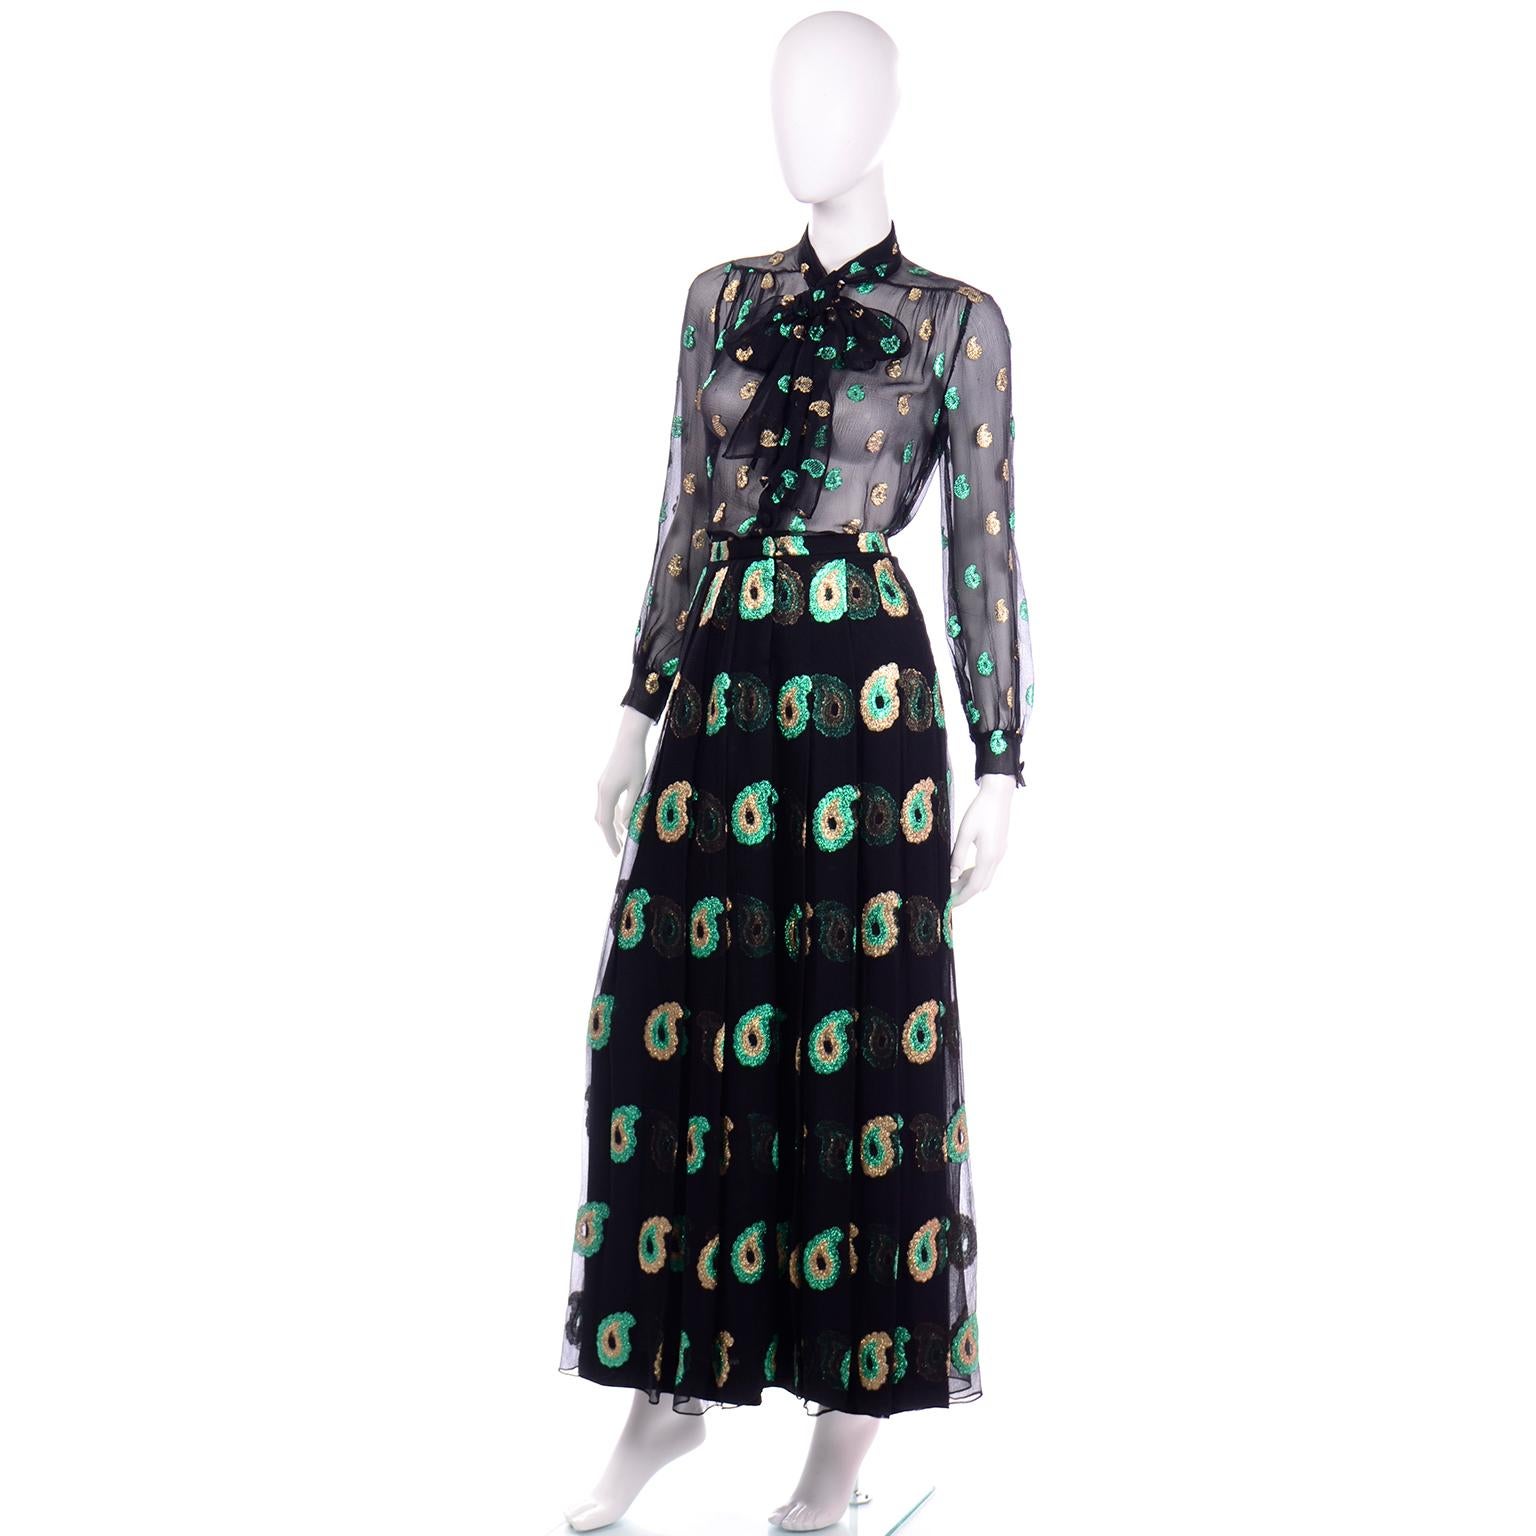 Jean Patou 2pc Black Gold & Green Paisley Dot Metallic Silk Dress w Sheer Blouse In Excellent Condition For Sale In Portland, OR